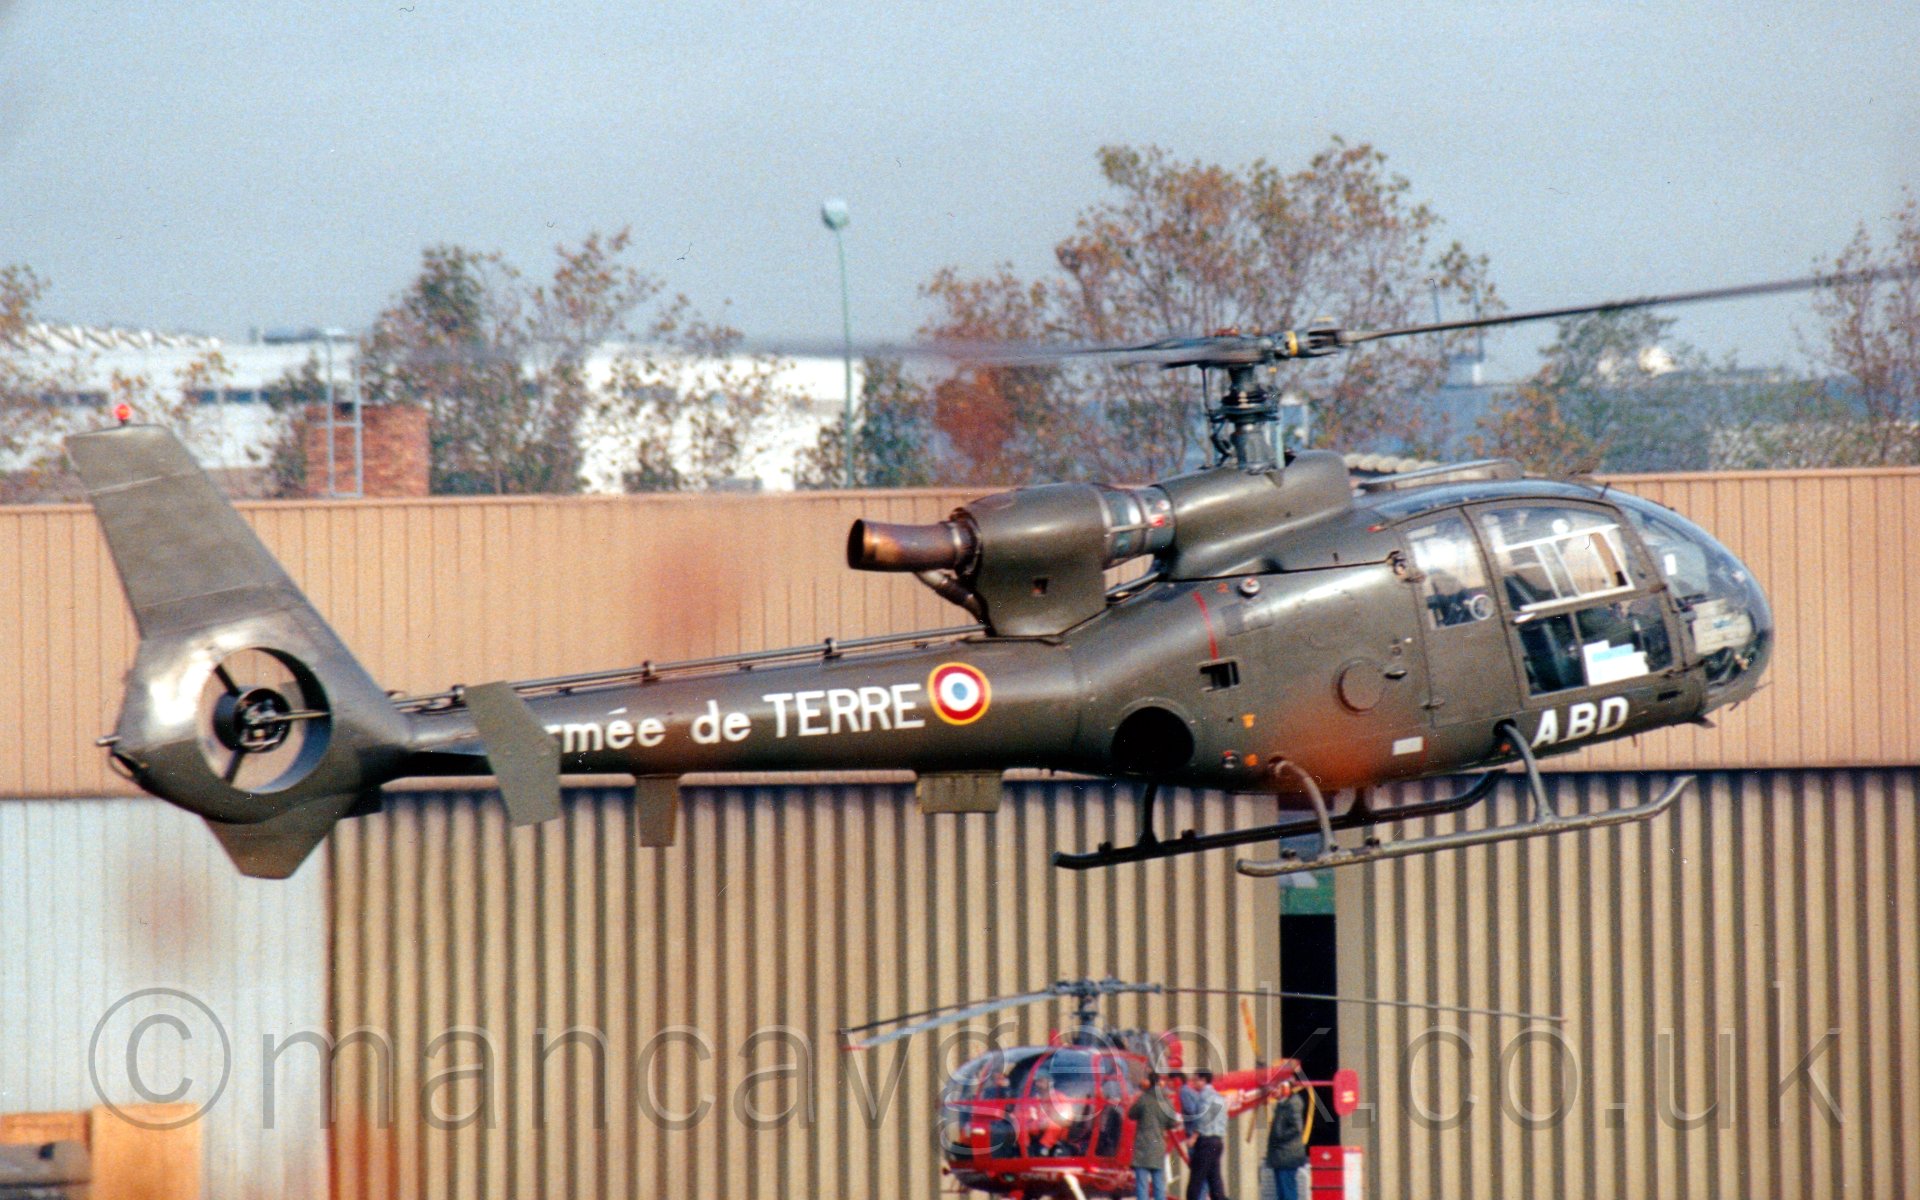 Side view of a military helicopter flying from left to right to land at a heliport. The helicopter is is mostly a drab brown, with a heavily glazed bulbous nose. and a singel engine mounted on the of the top of the fuselage. A long, thick tailbook holds a shrouded fan at the end instead of a normal tail rotor. The letters "ABD" are painted under the cockpit doors, with "Armee de Terre" on the tail boom, next to a red, white, and light blue roundel, outlined in yellow. In the background, a large, sandy-coloured hangar fills most of the frame, with a red helicopter parked in front right at the bottom, with trees and a large white building in the distance, under a hazy grey sky.